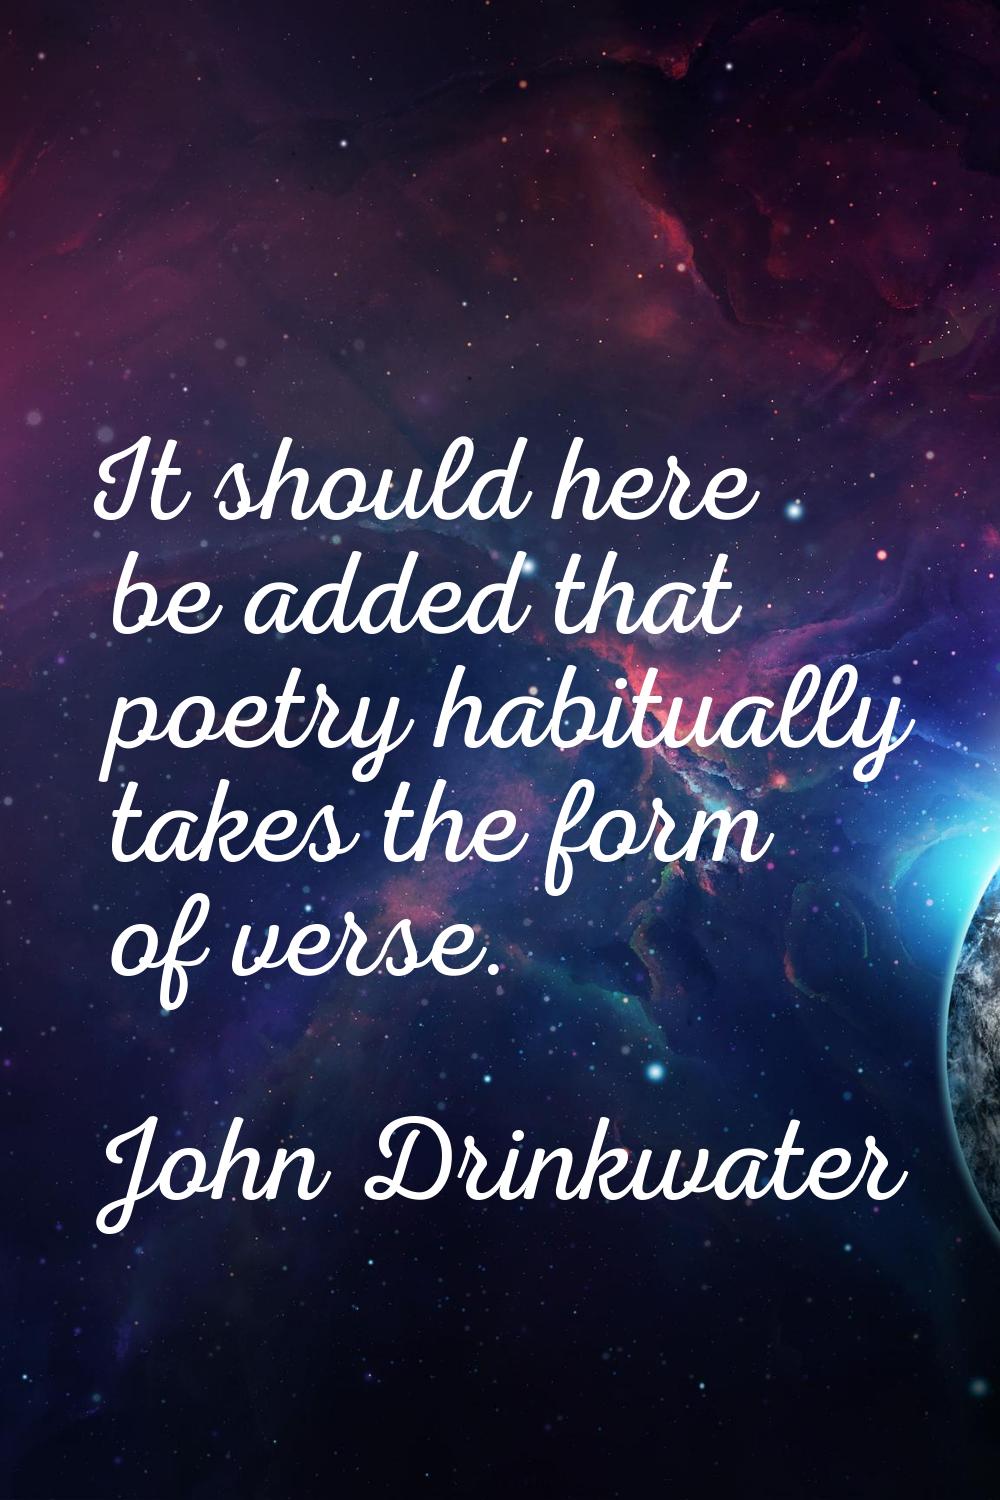 It should here be added that poetry habitually takes the form of verse.